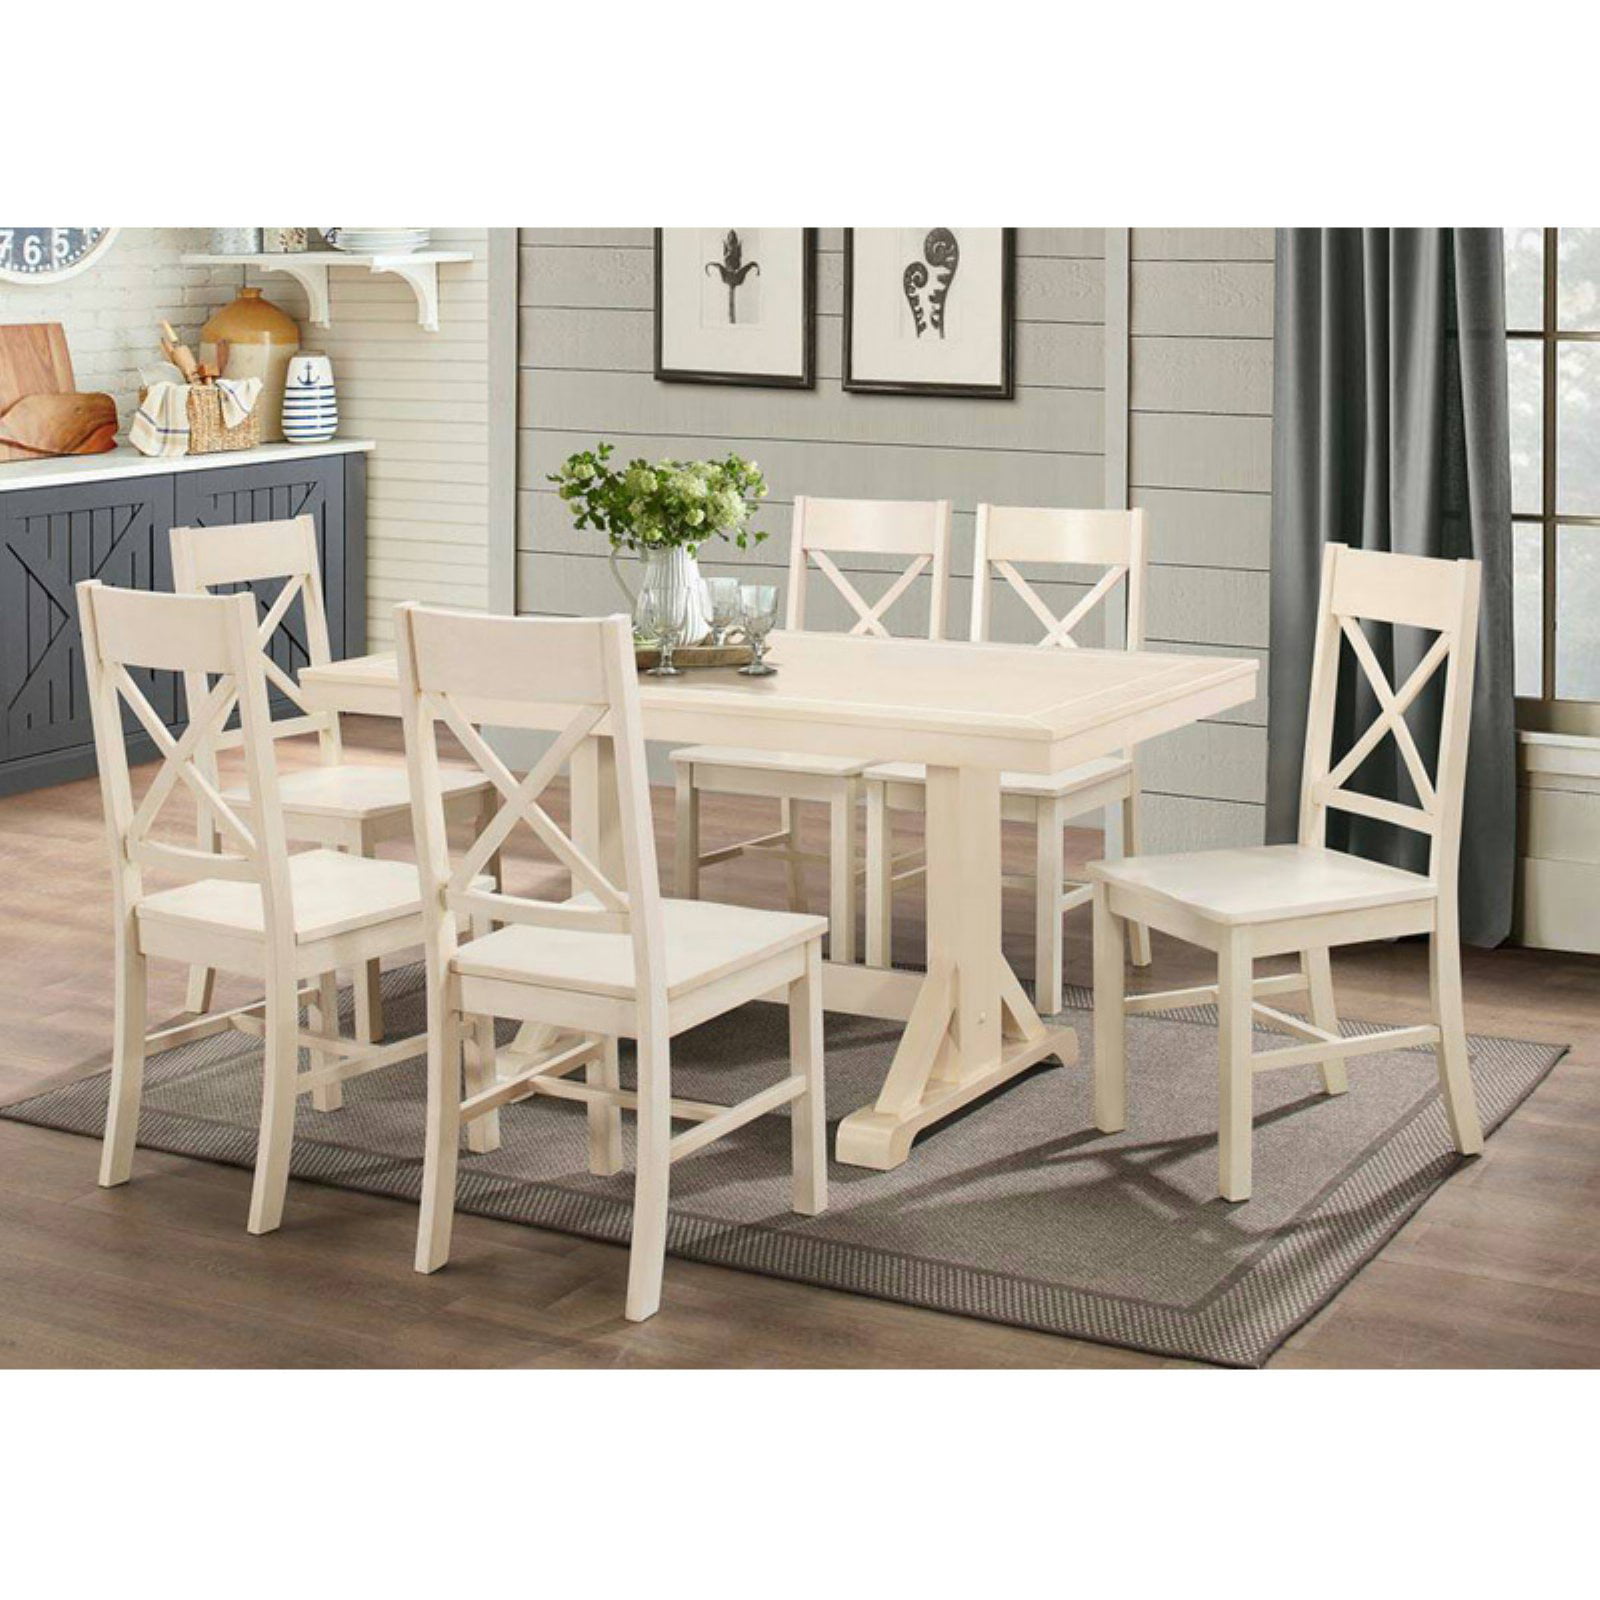 Walmart Dining Room Table Sets - Dining Table Set Dining Room Table Set